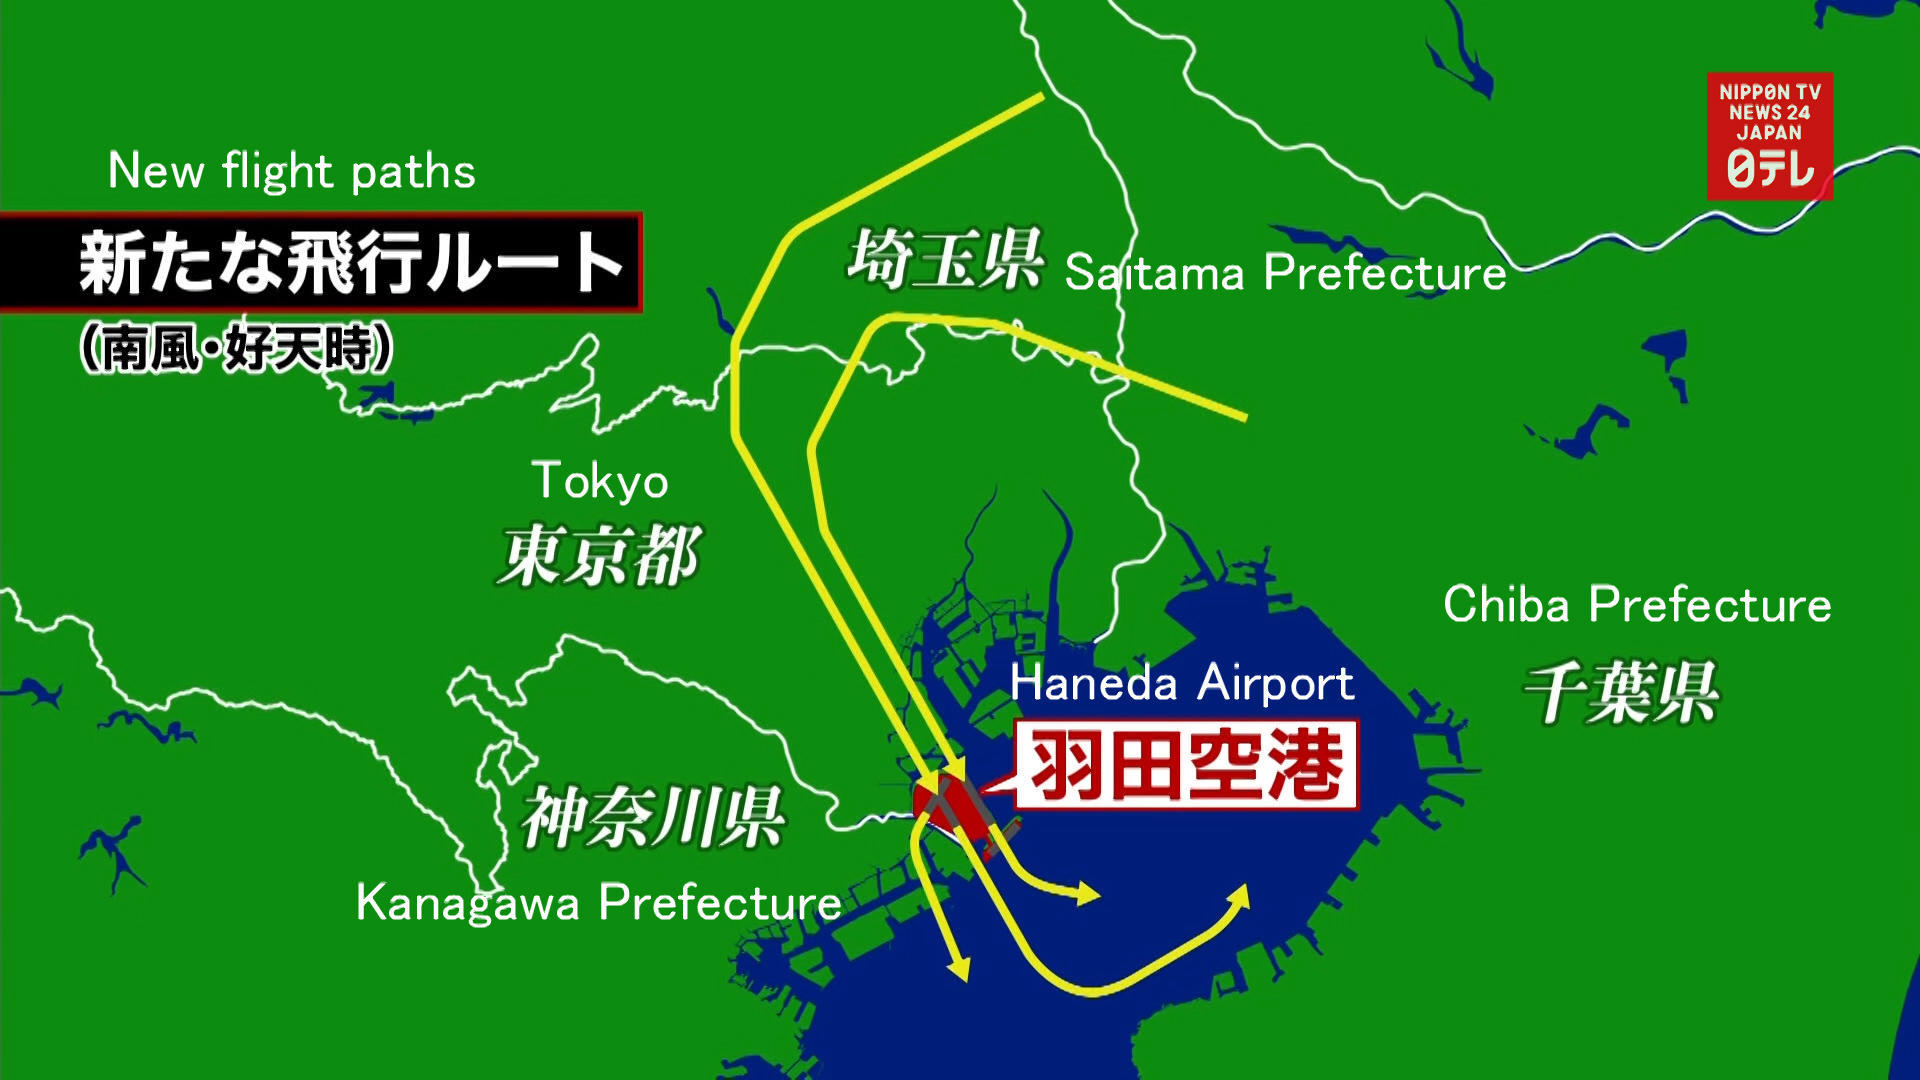 Japan to add new flight paths for Haneda Airport